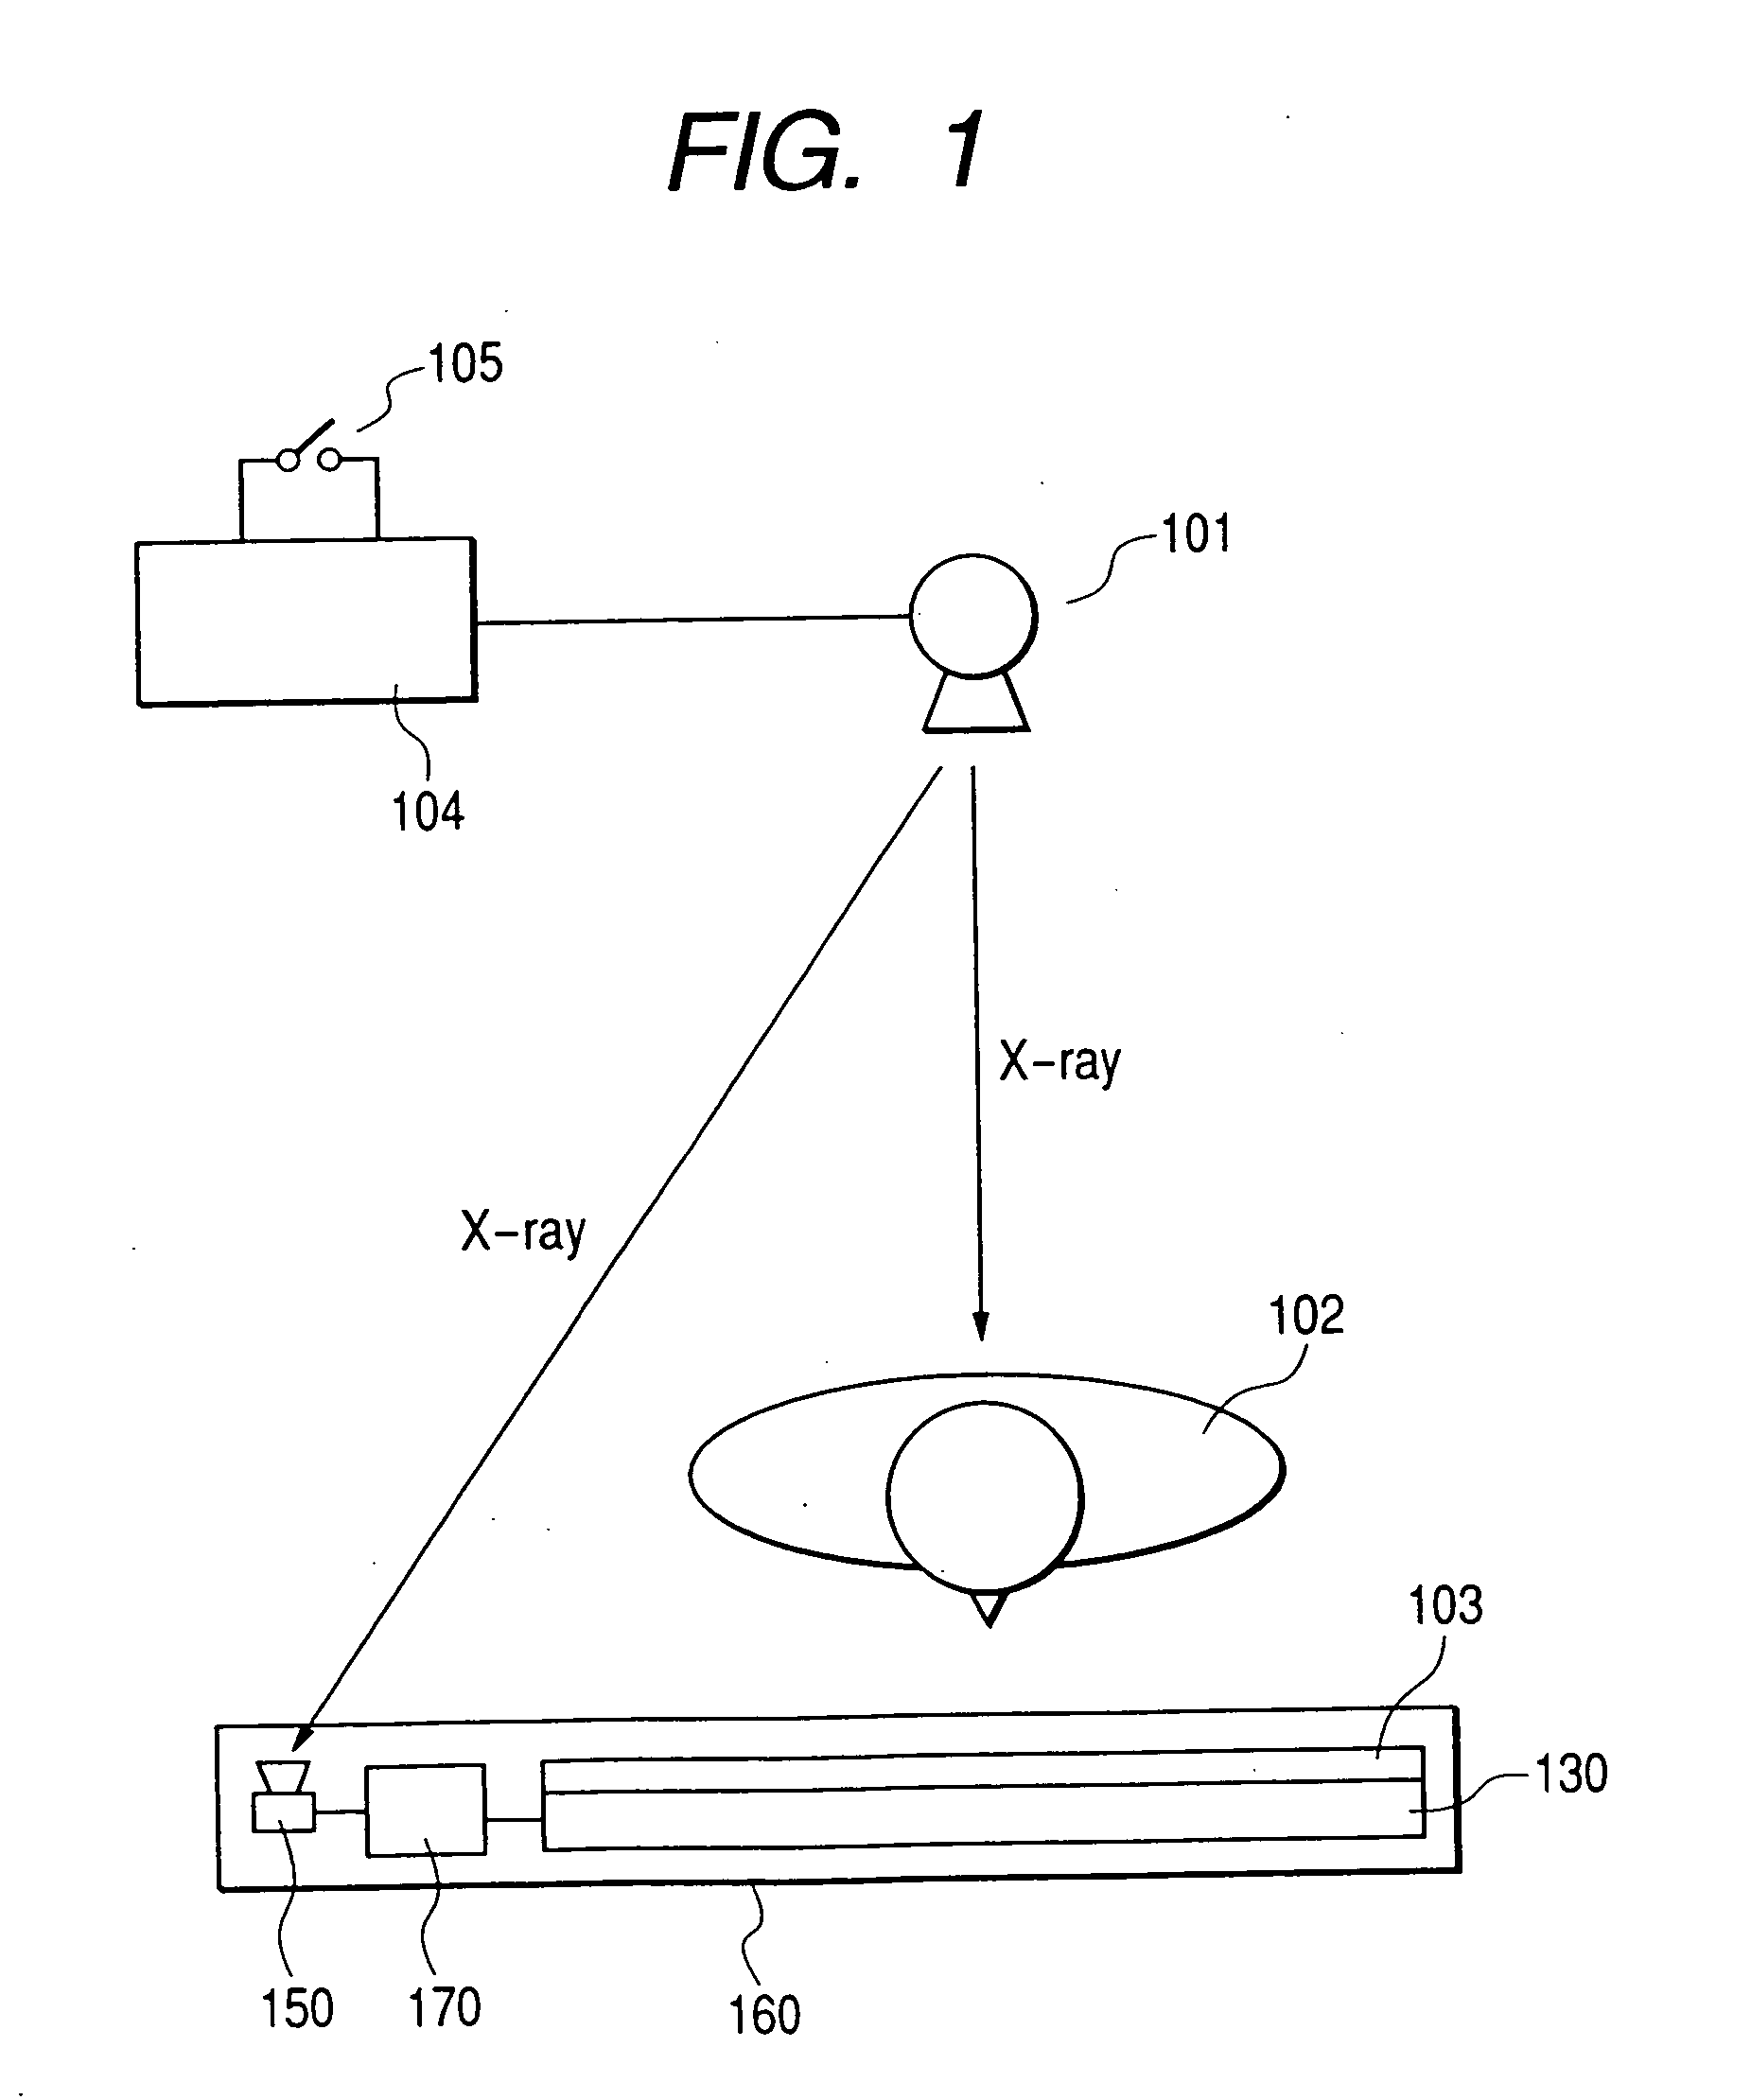 Radiation image pick-up apparatus and system